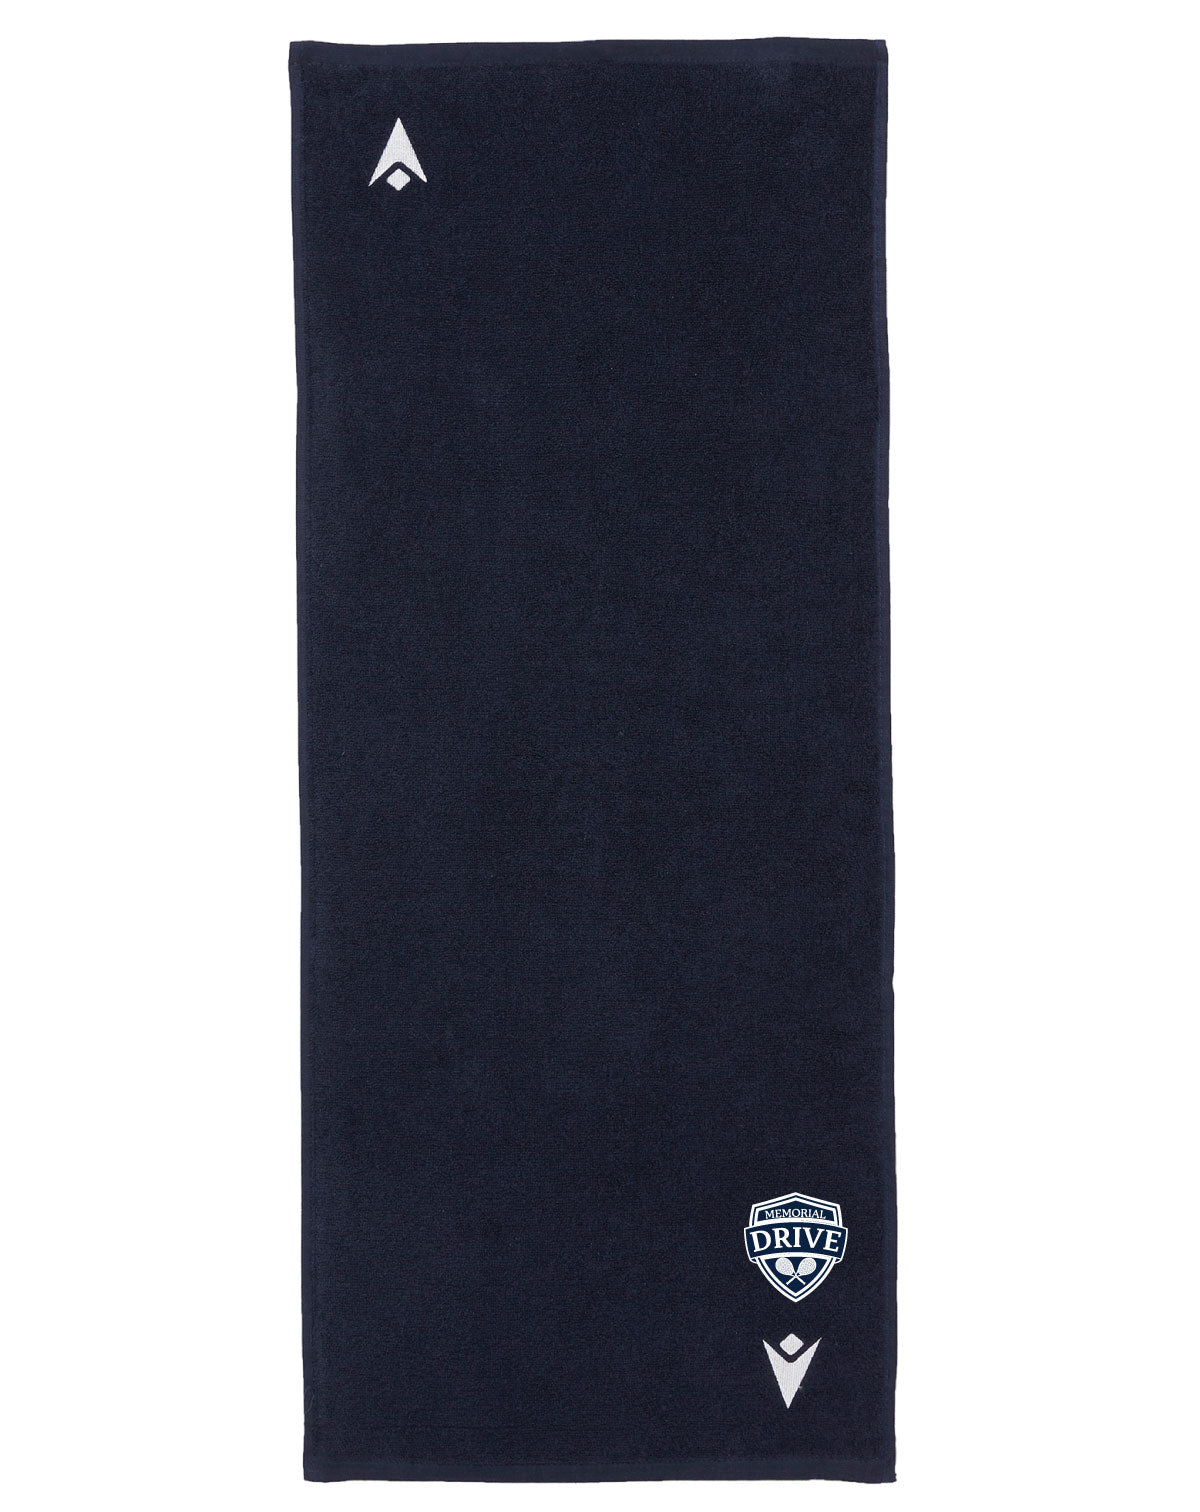 THE DRIVE - BISE GYM TOWEL